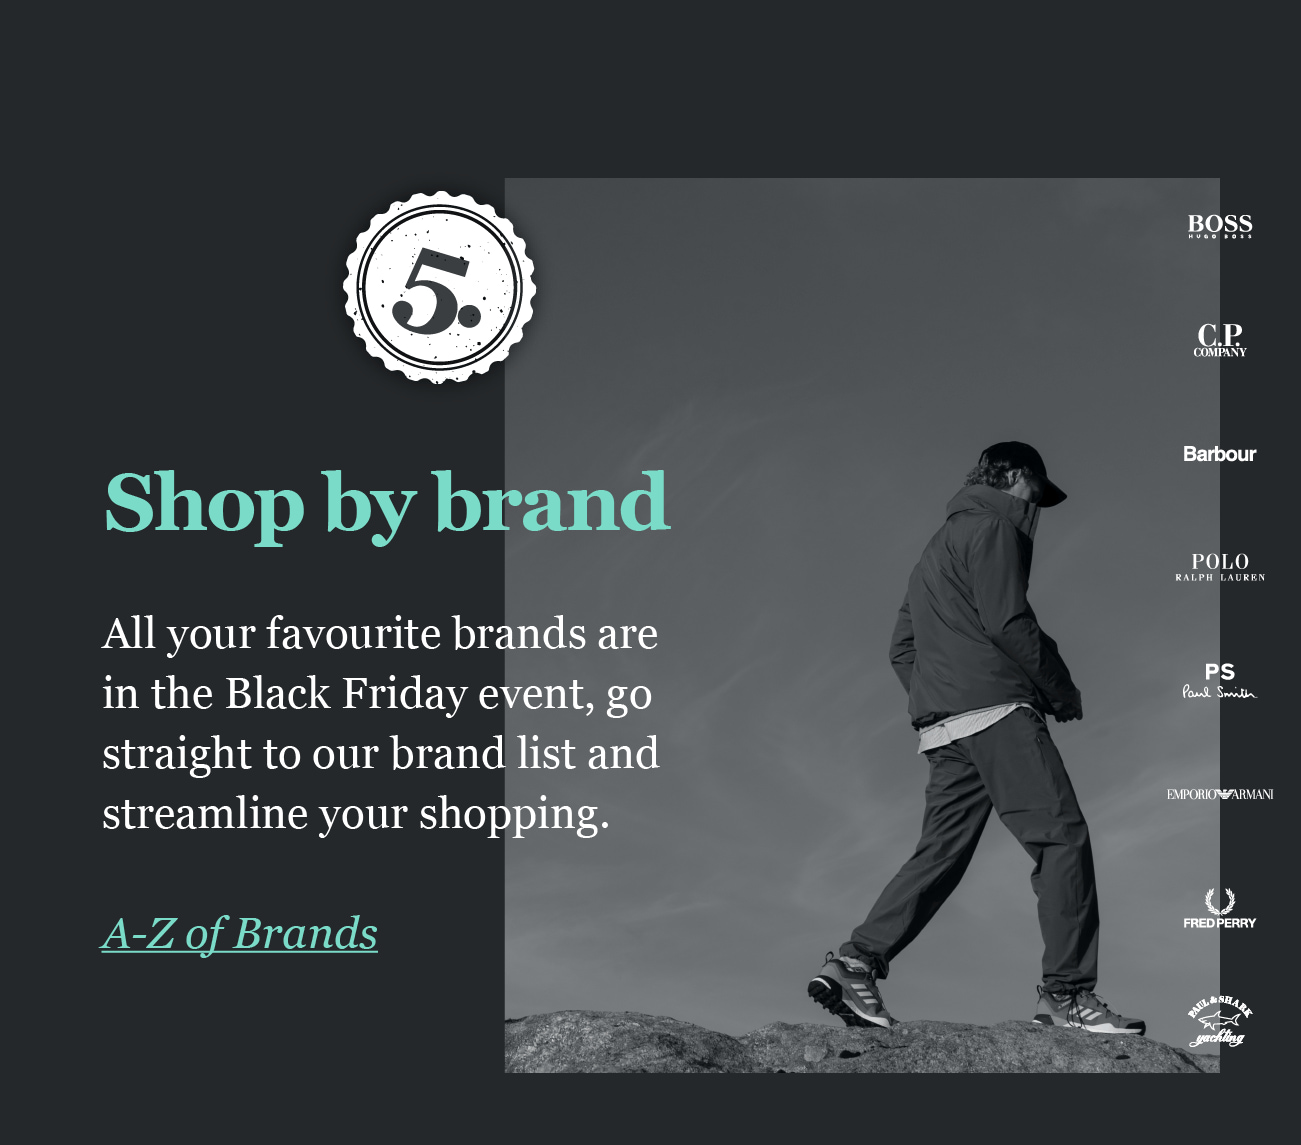 5. 

Shop by brand
All your favourite brands are
in the Black Friday event, go
straight to our brand list and
streamline your shopping.

A-Z of Brands